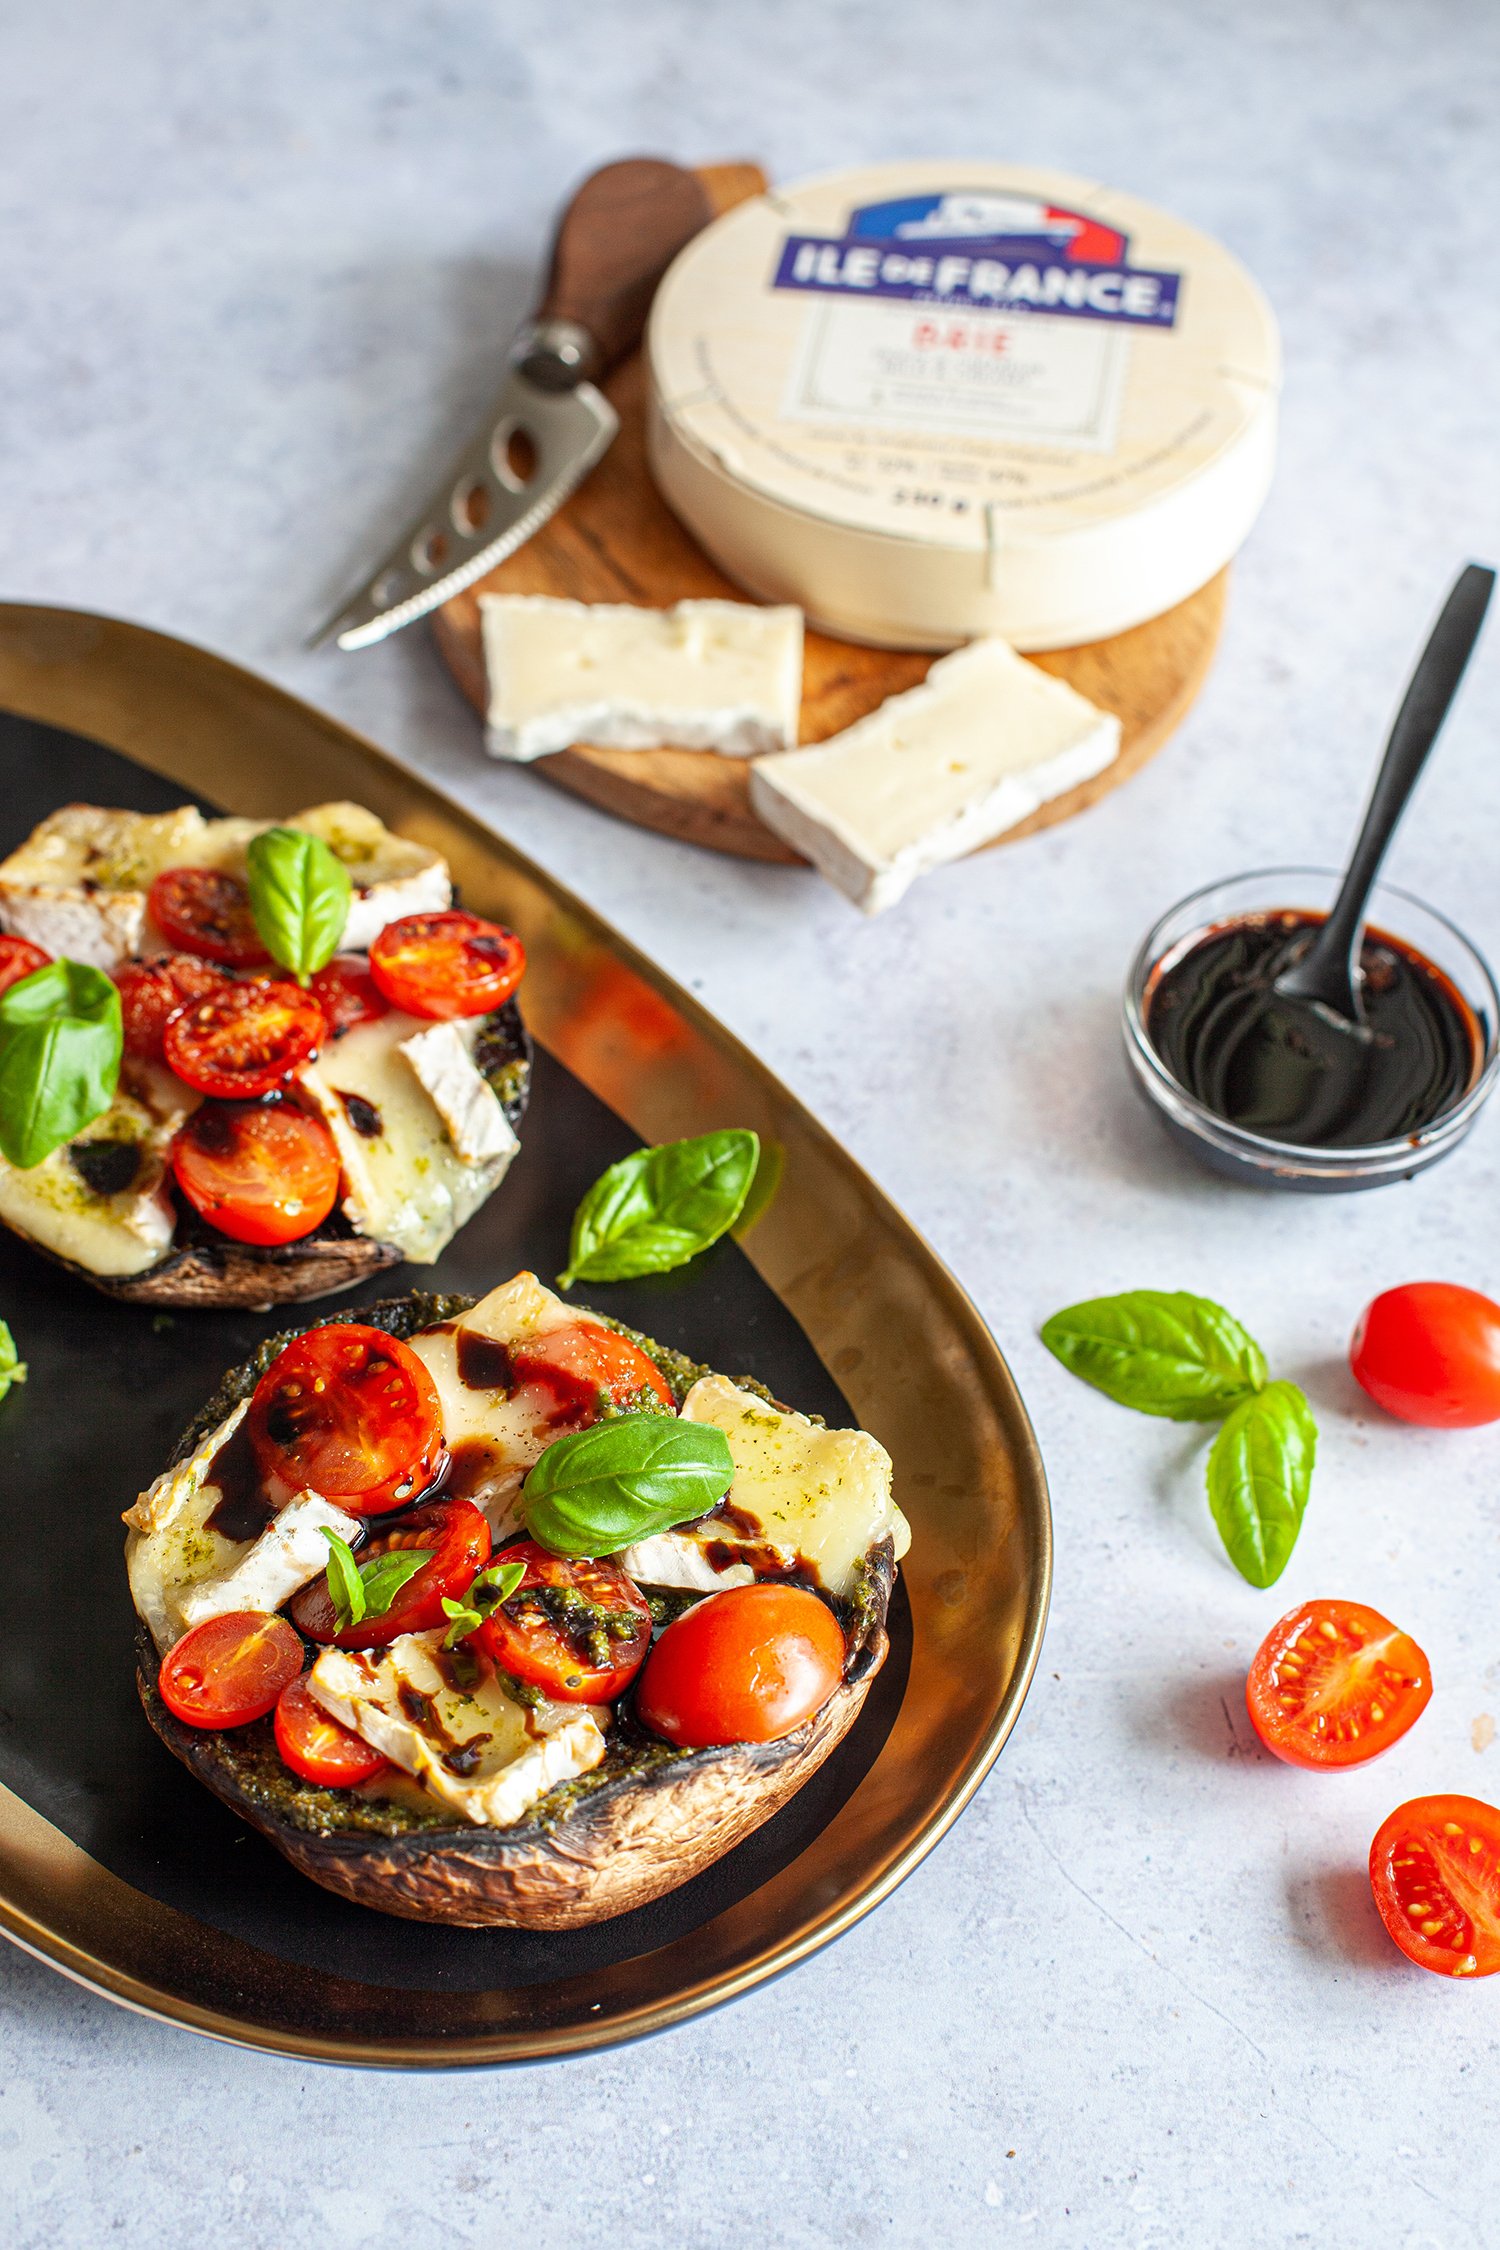 Recipe - Stuffed Portobello mushrooms with melted Île de France brie cheese